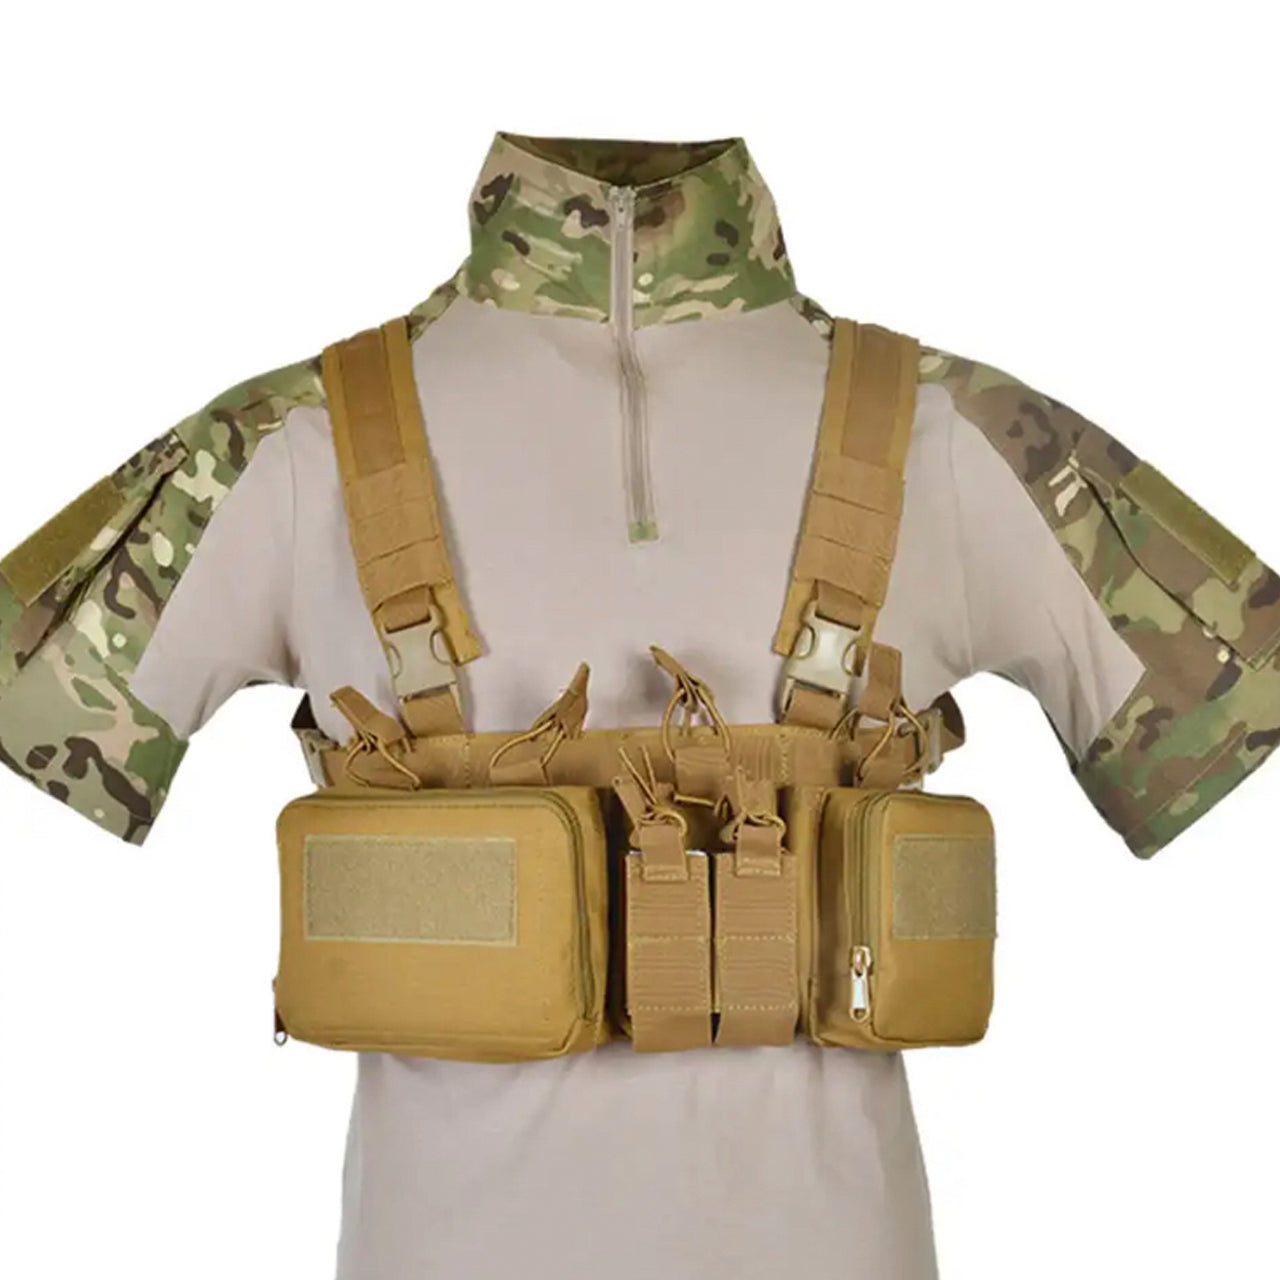 Defence Q Store Chest Rig X Harness The multi-functional assault MOLLE system combat vest is made of 600D waterproof oxford cloth. The fabric has high precision and strong functionality which is more suitable for outdoor activities. Great for Military, cadets, airsoft and other outdoor activities www.defenceqstore.com.au